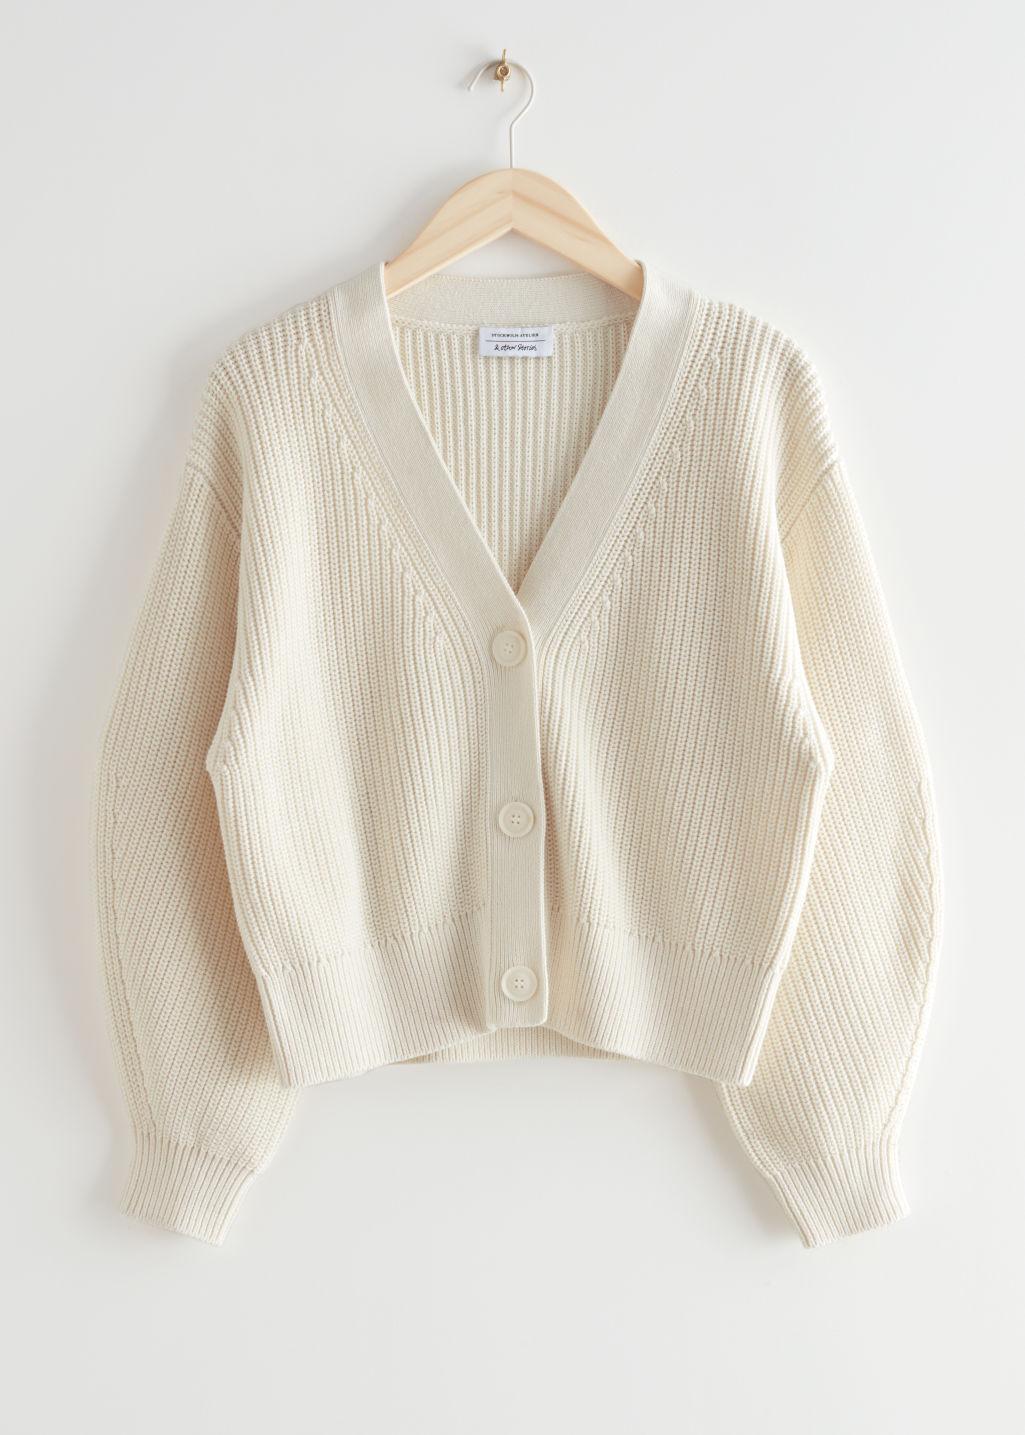 & Other Stories Cropped Boxy Rib Cardigan in White | Lyst Canada